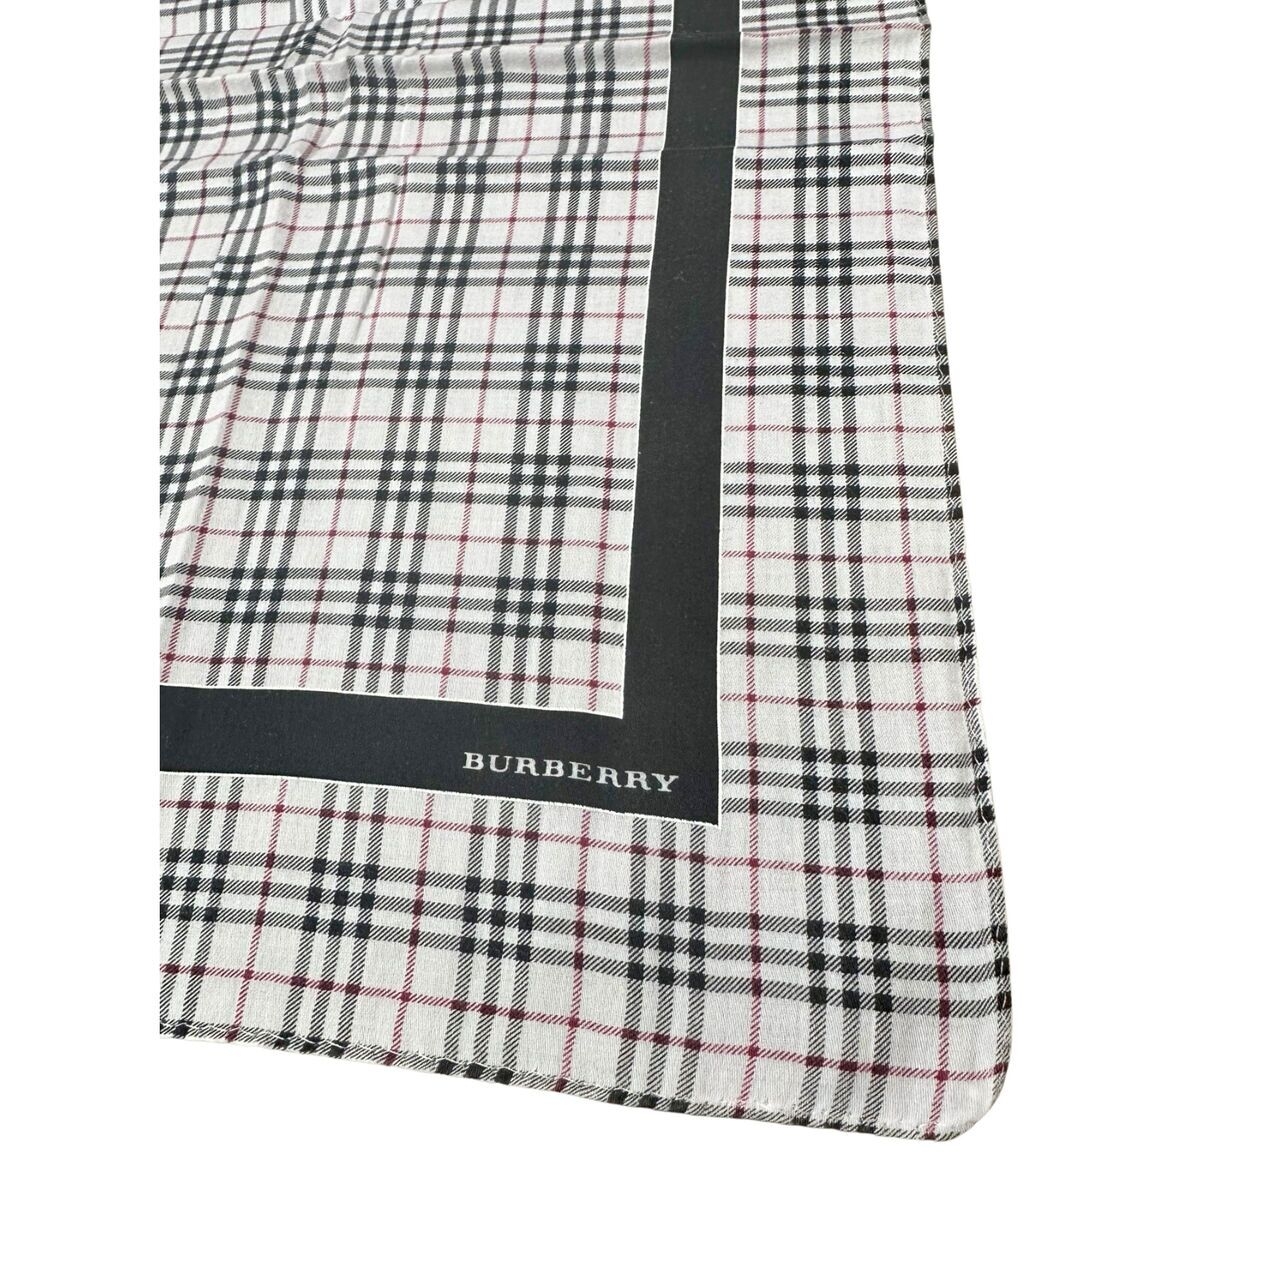 Burberry Dusty Pink And Black Plaid Scarf